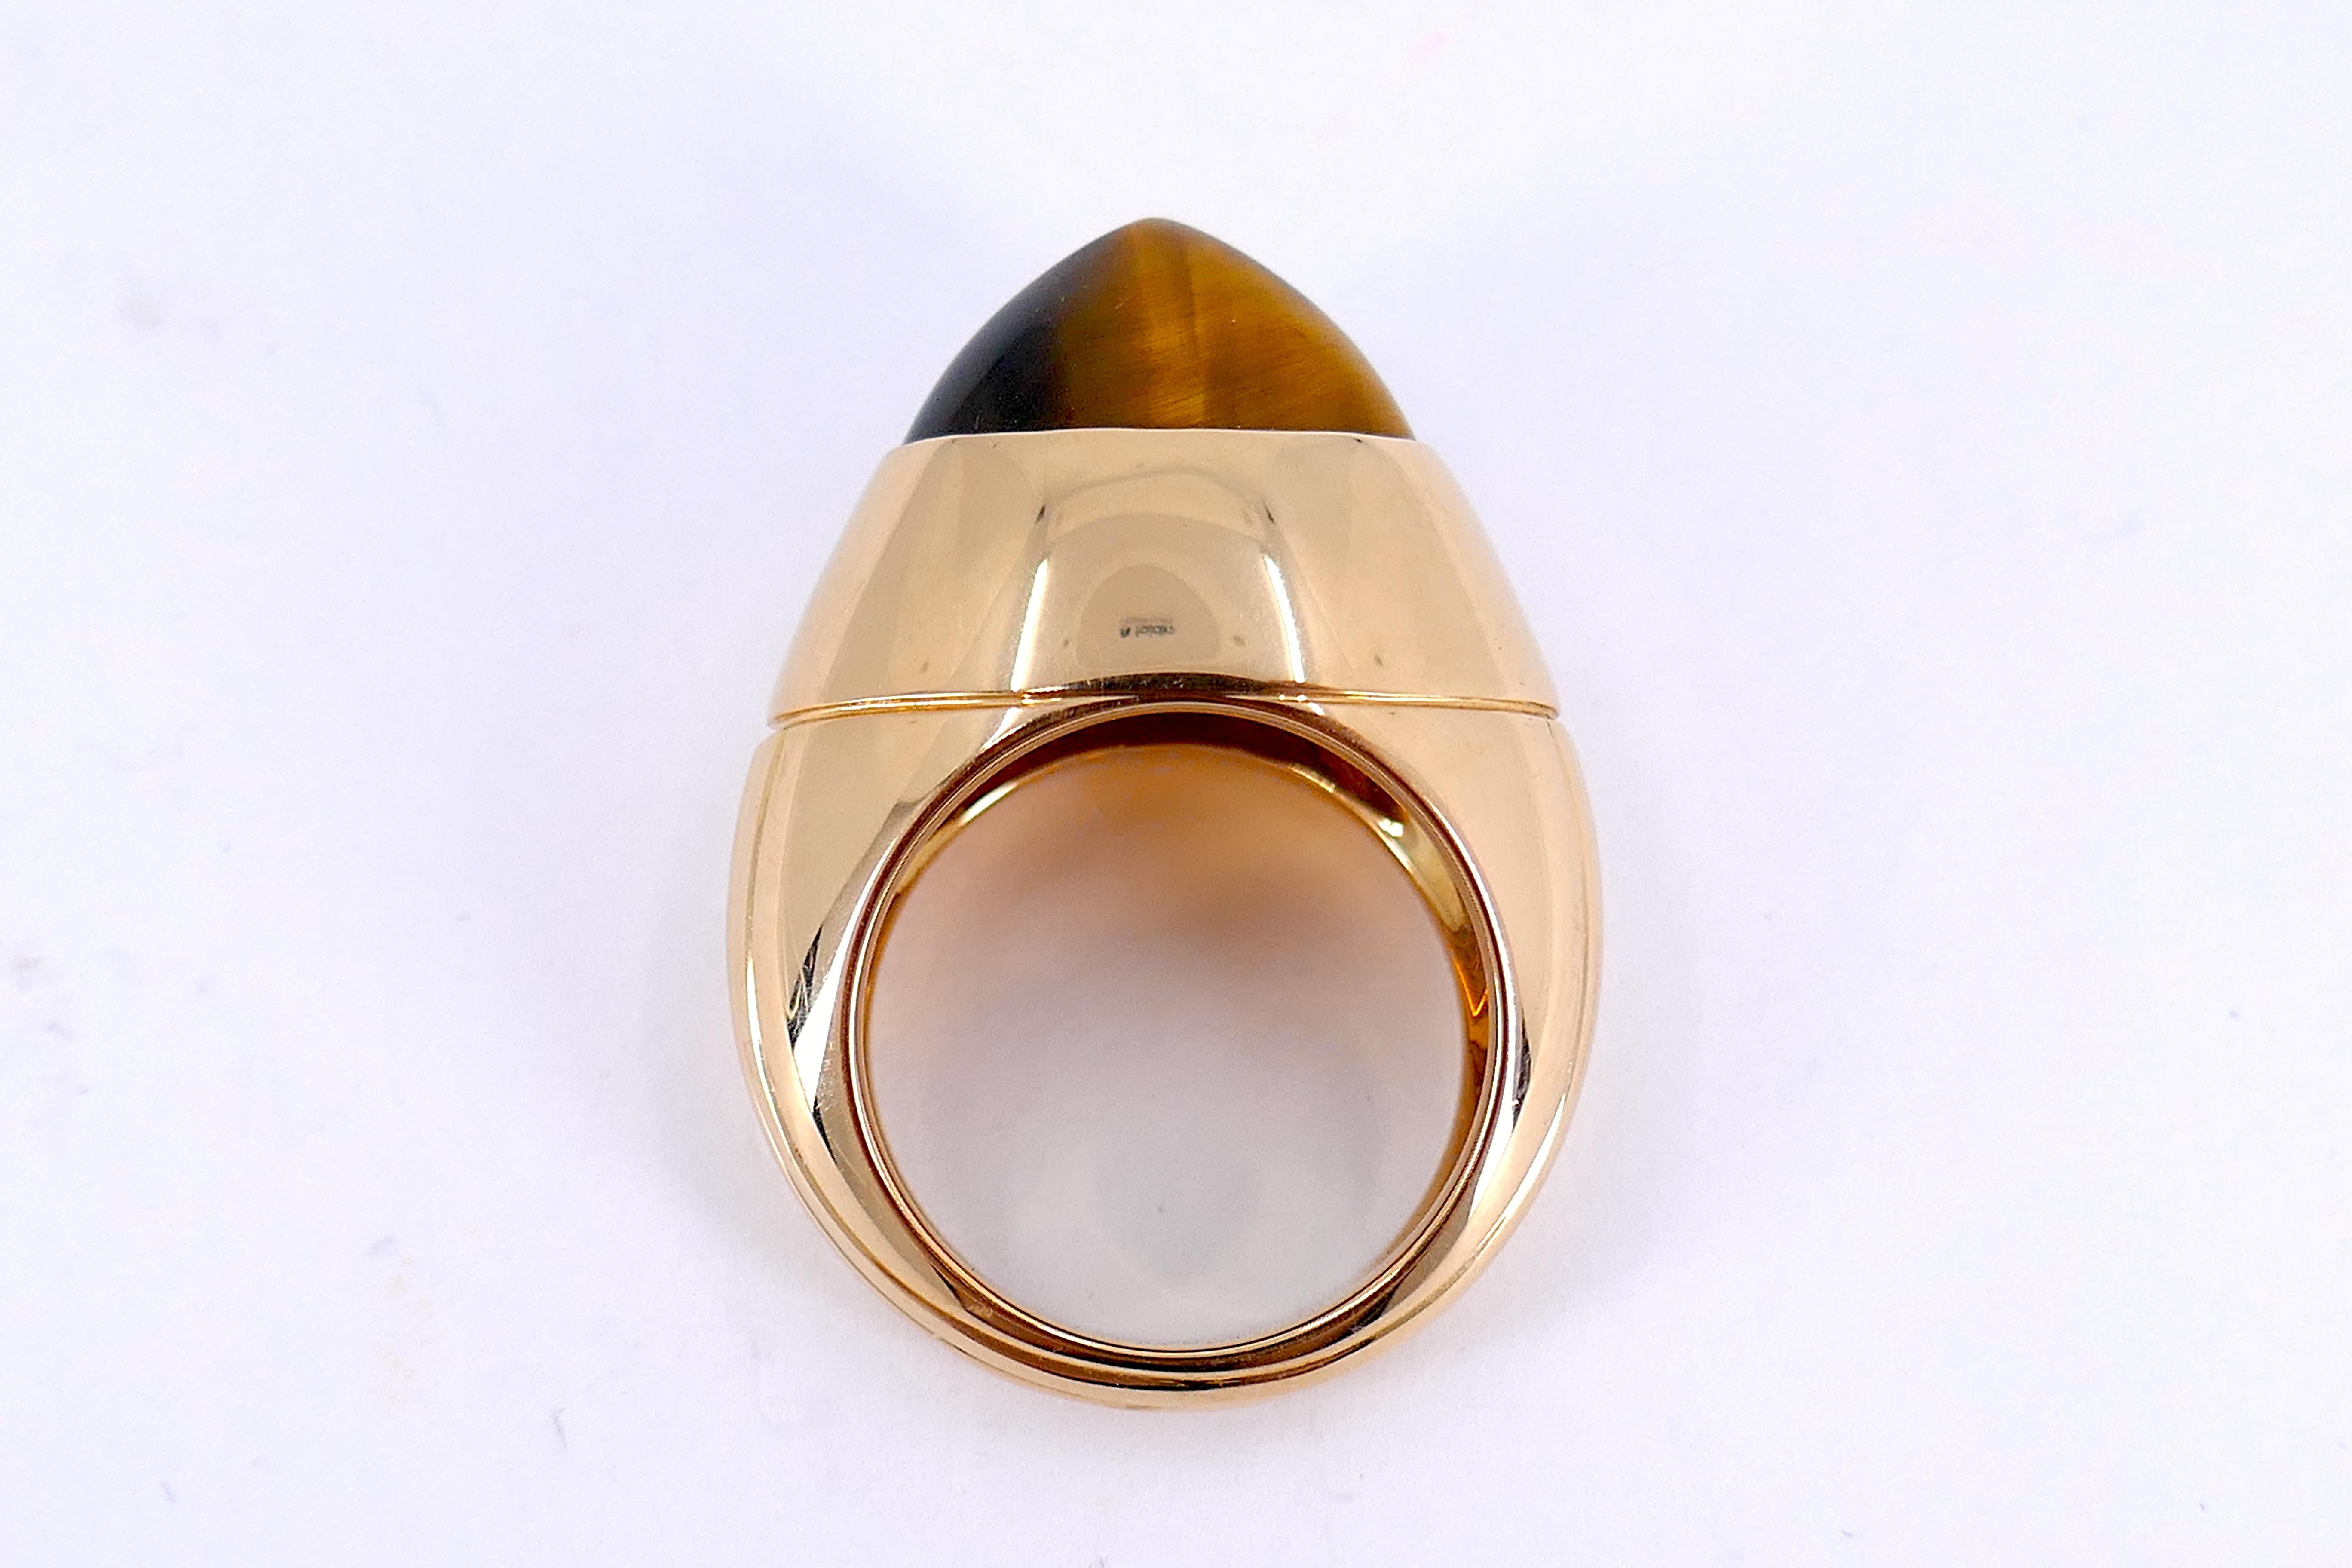 Boucheron Paris High dome cabochon Tiger eye Ring 18k Rose gold Size 5.5
Marks: BOUCHERON OR750 / 50 E25738
French Essay Mark: Eagle
Makers Mark: SBB

Elevate your jewelry collection with the Boucheron Paris High Dome Cabochon Tiger Eye Ring in 18K